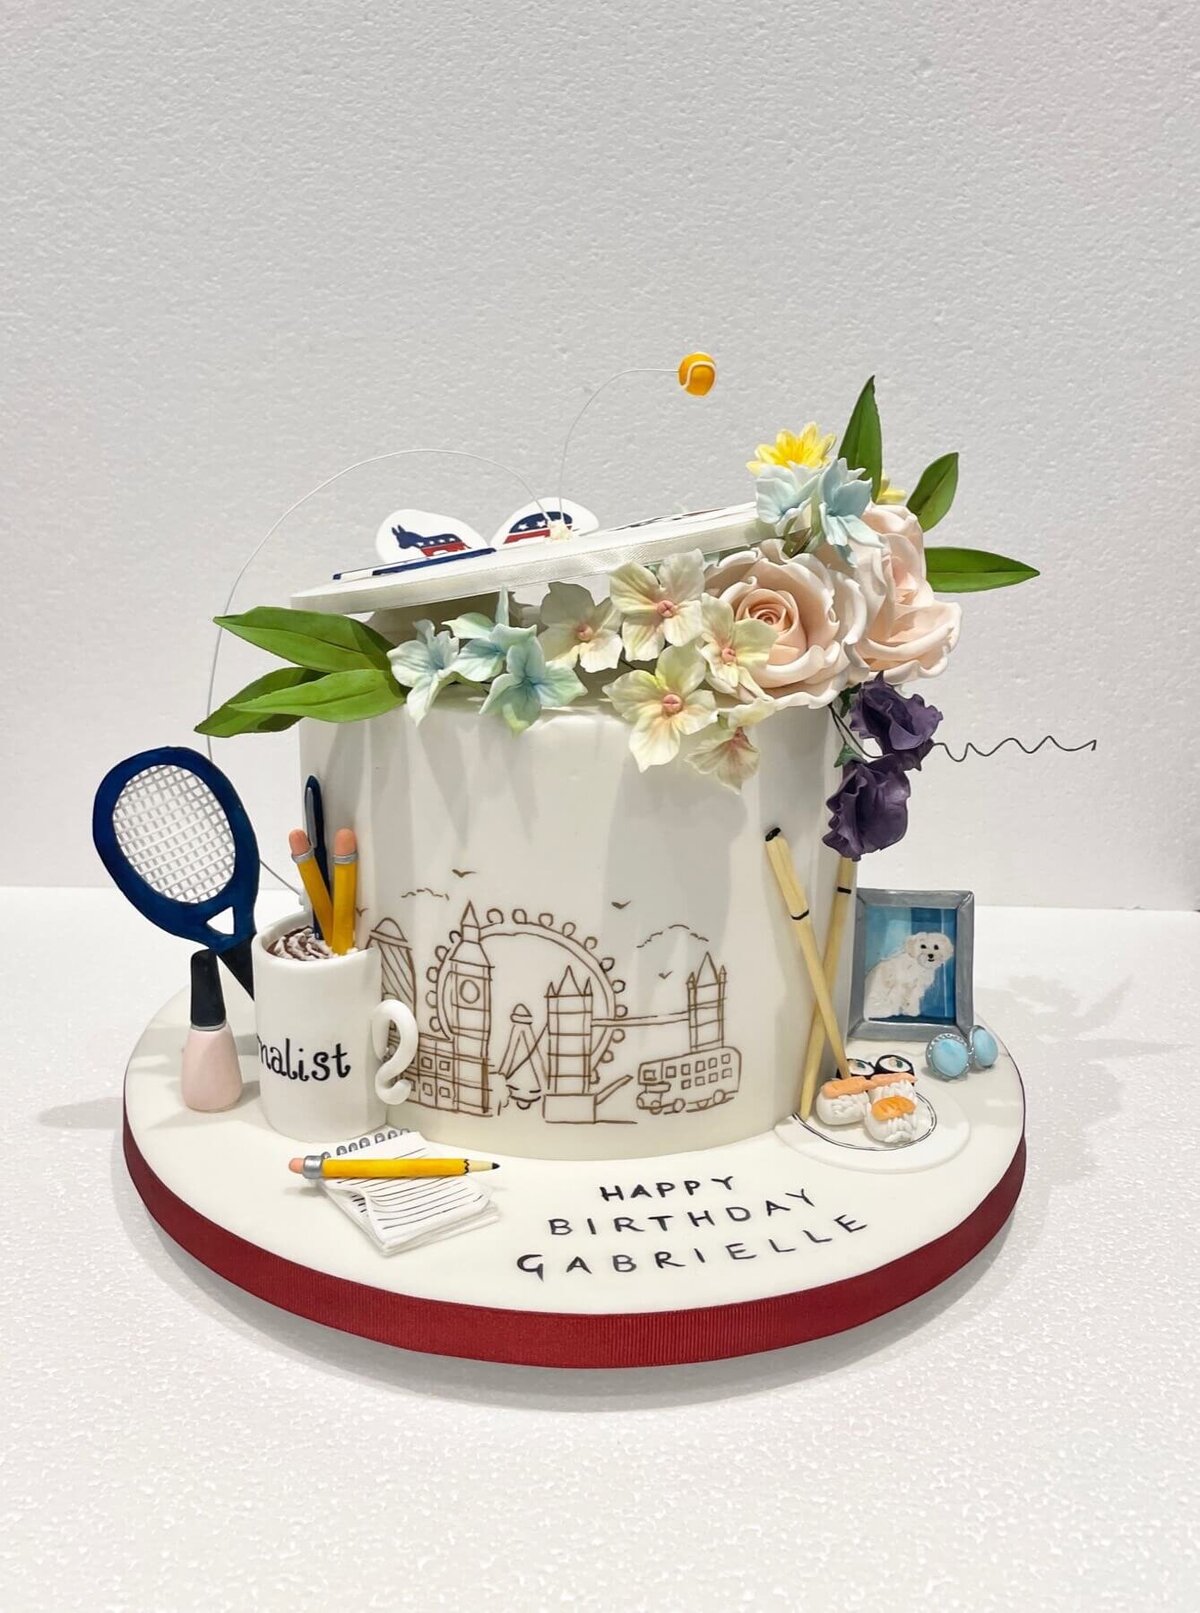 An intricate birthday cake with a hand painted London sky line and a model mug, pencils, tennis racket, nail polish, picture of a dog and more